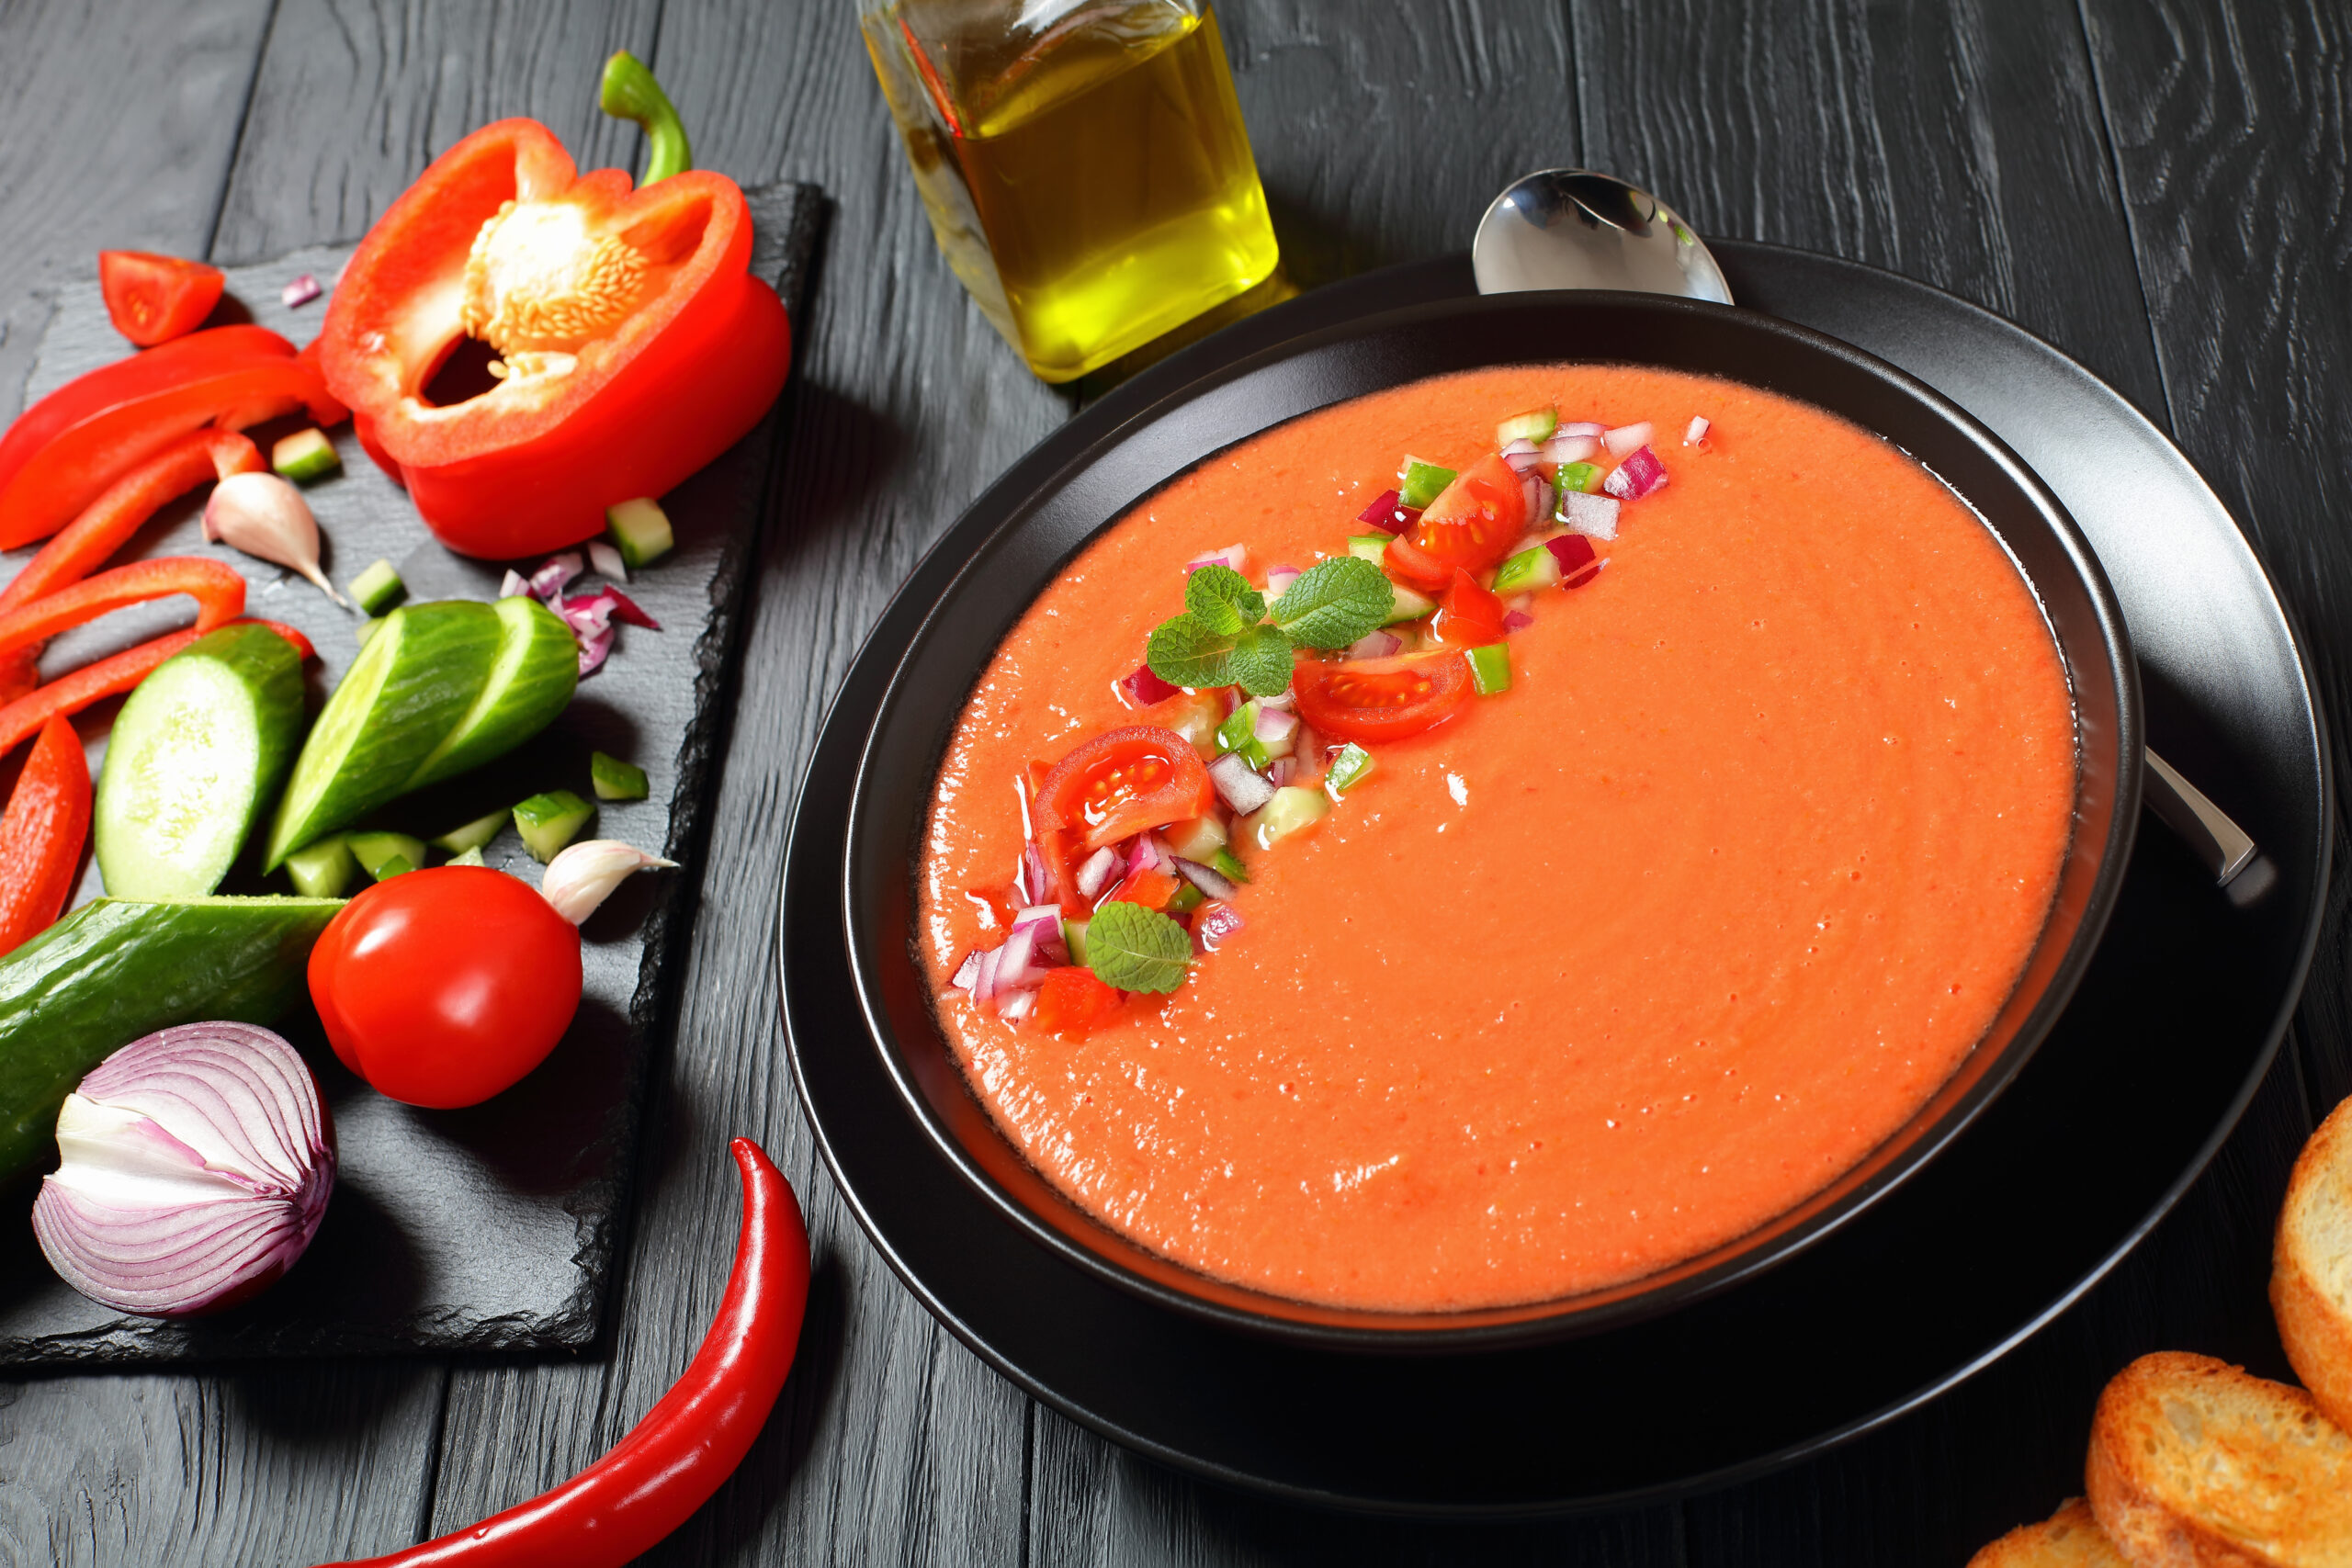 Gazpacho recipe, a typical Spanish cold soup, very refreshing and healthy